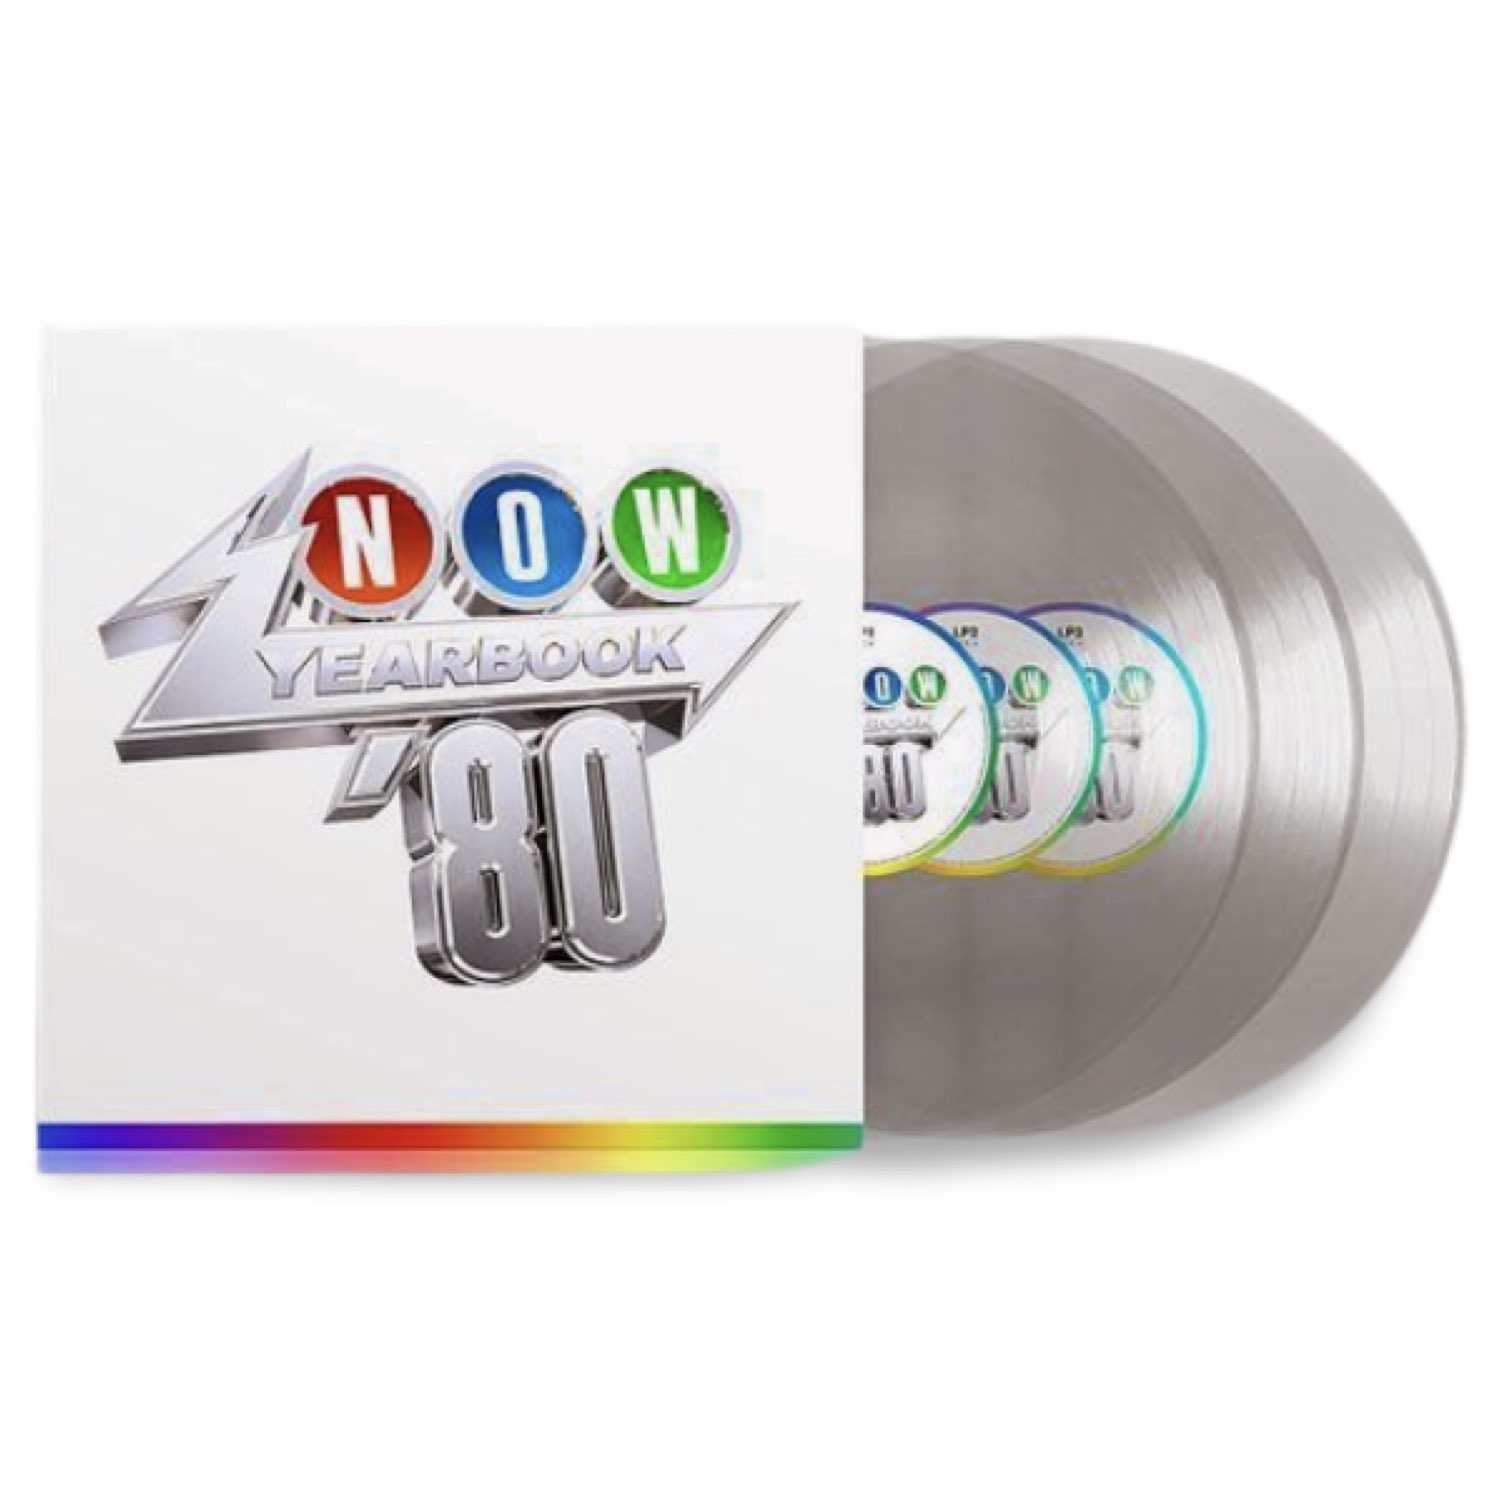 NOW  Yearbook 1980 [Limited Edition - Triple Clear Vinyl]